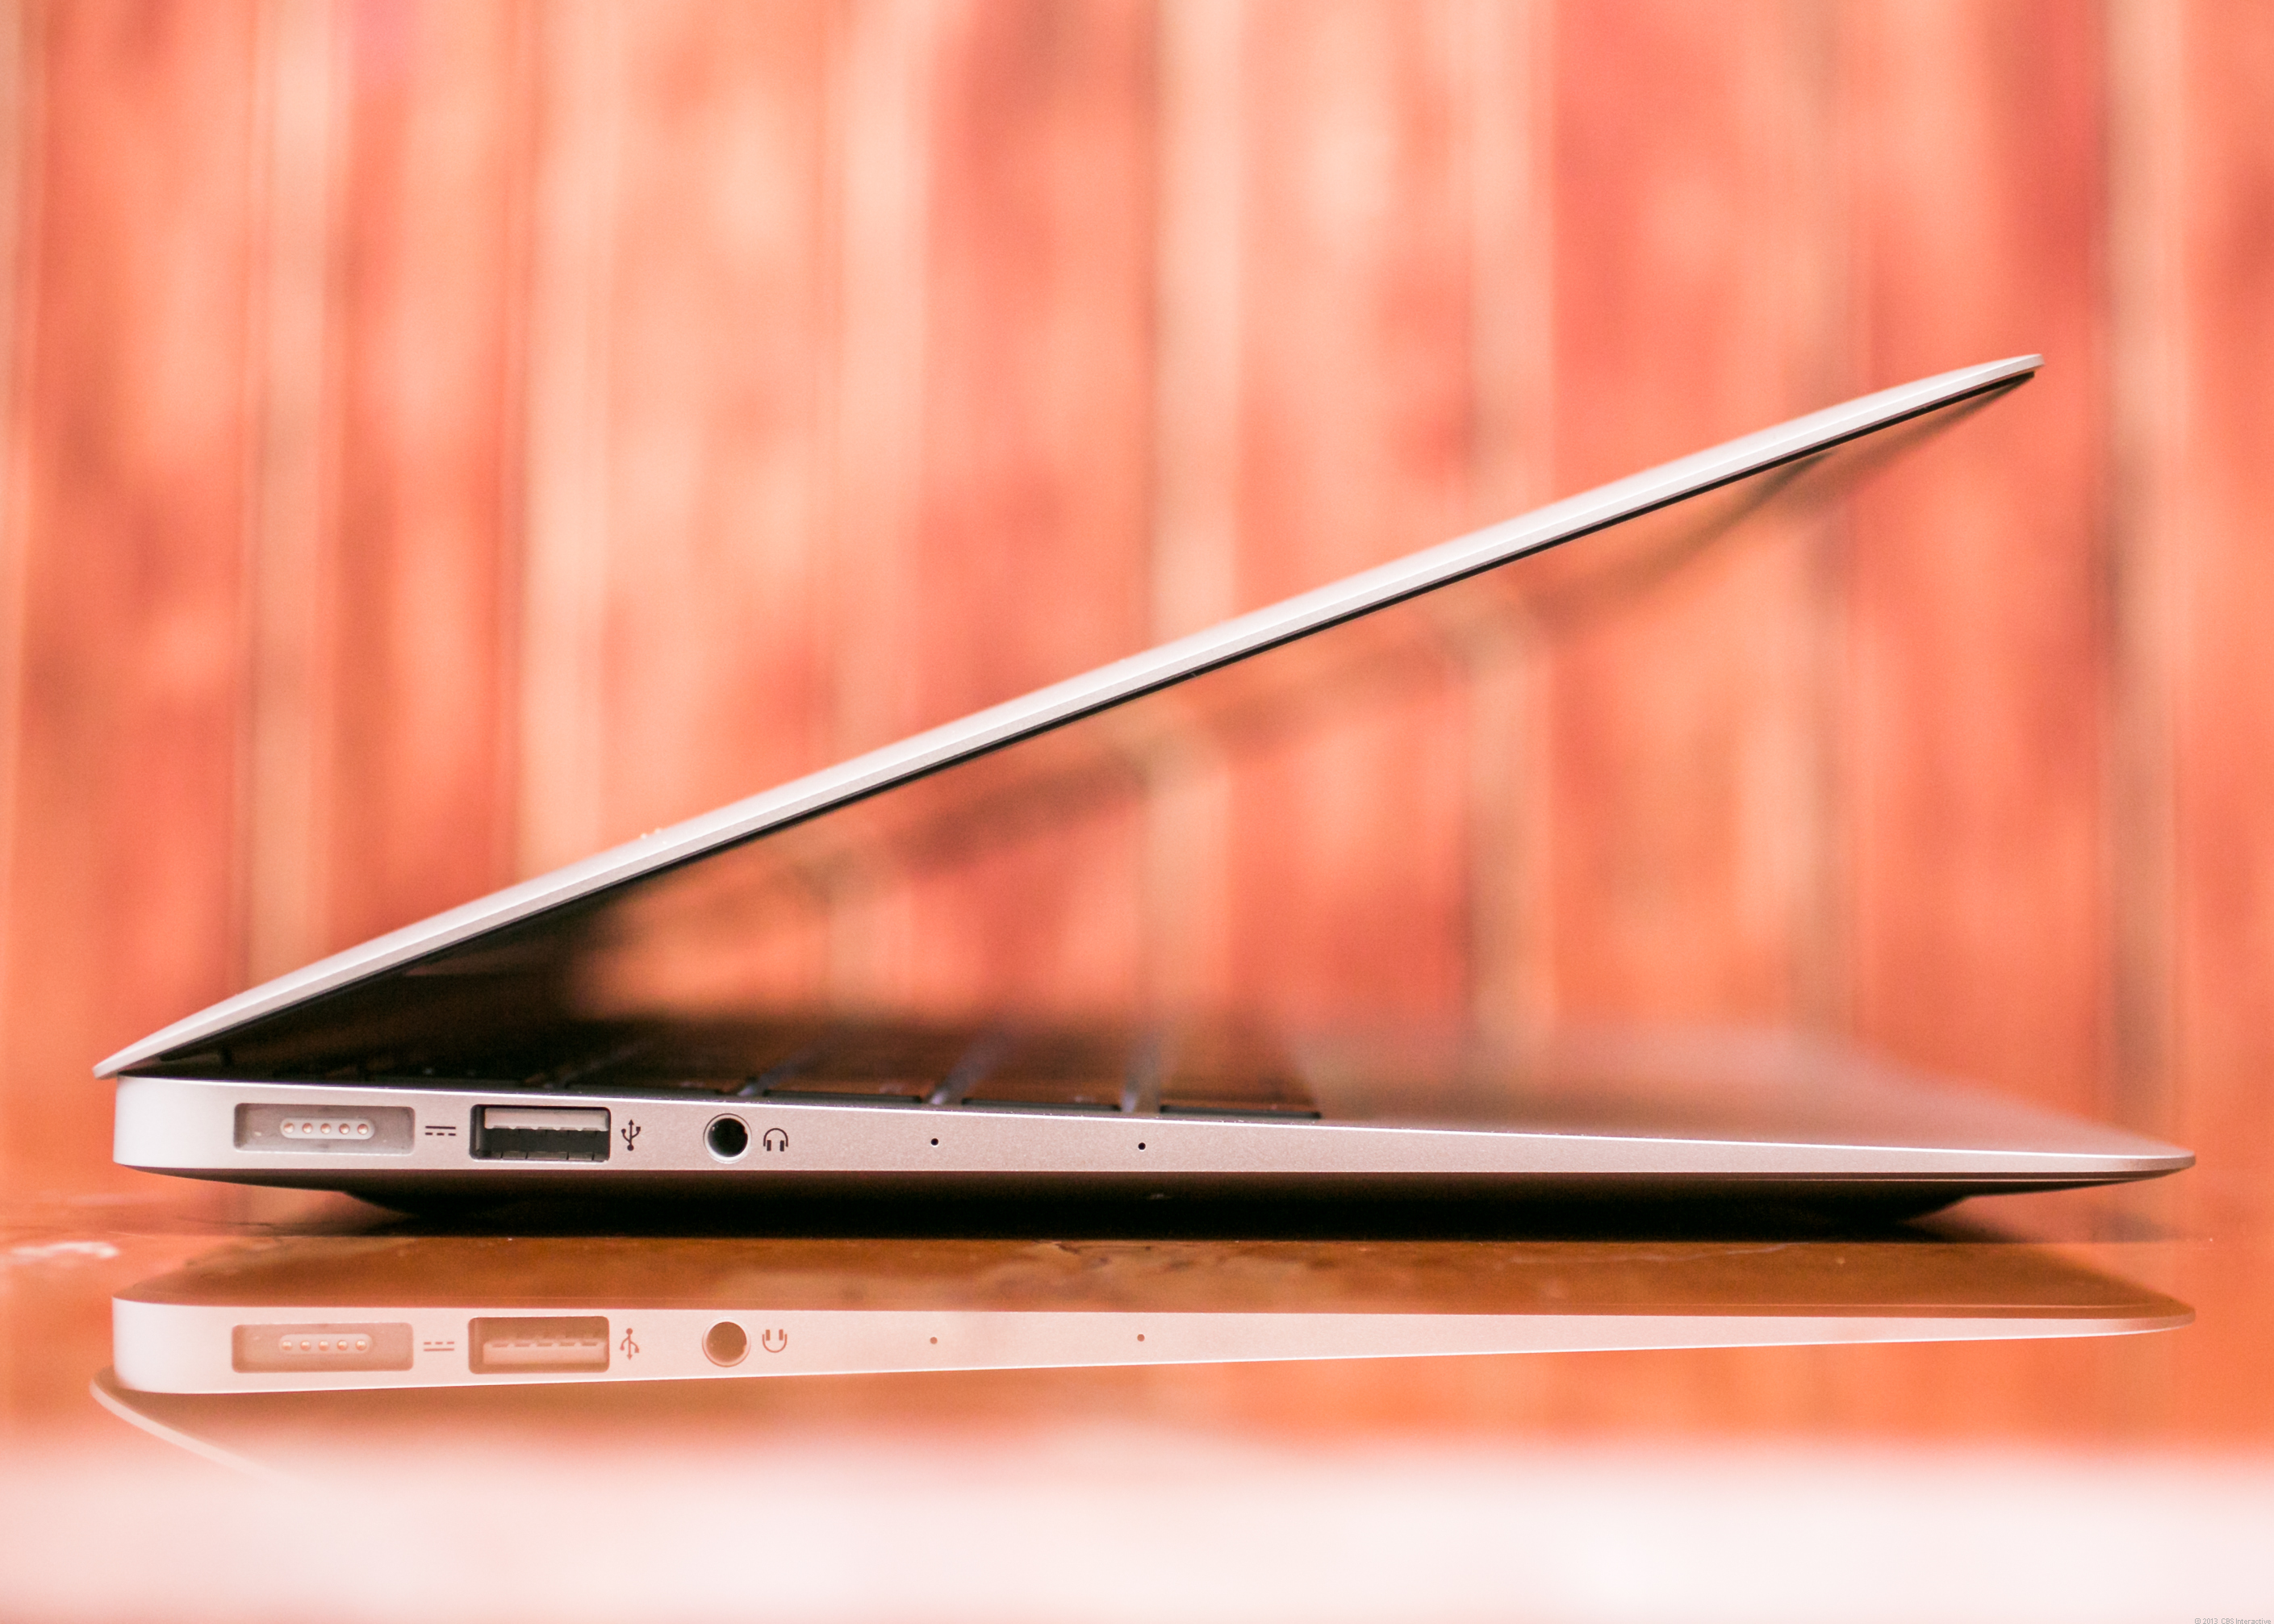 Apple MacBook Air (11-inch, April 2014) review: Apple's 11-inch 